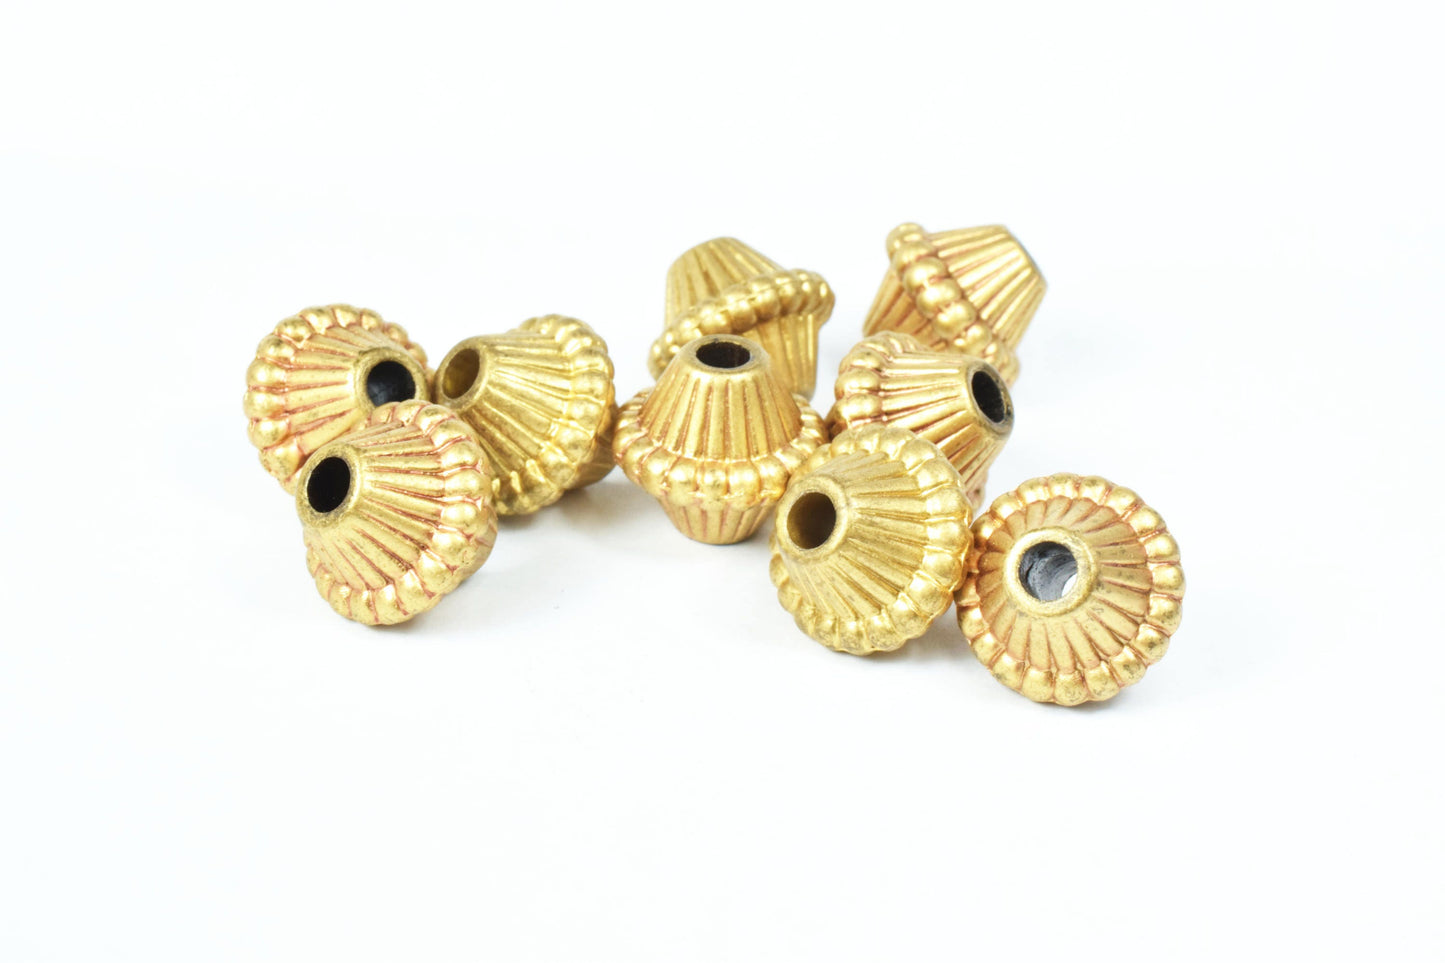 16mm Tube Cone Funnel Bead, Antique Gold Plastic Resin Textured Beads, Plastic Gold Beading Tools, Wholesale Beads, Macrame Beads